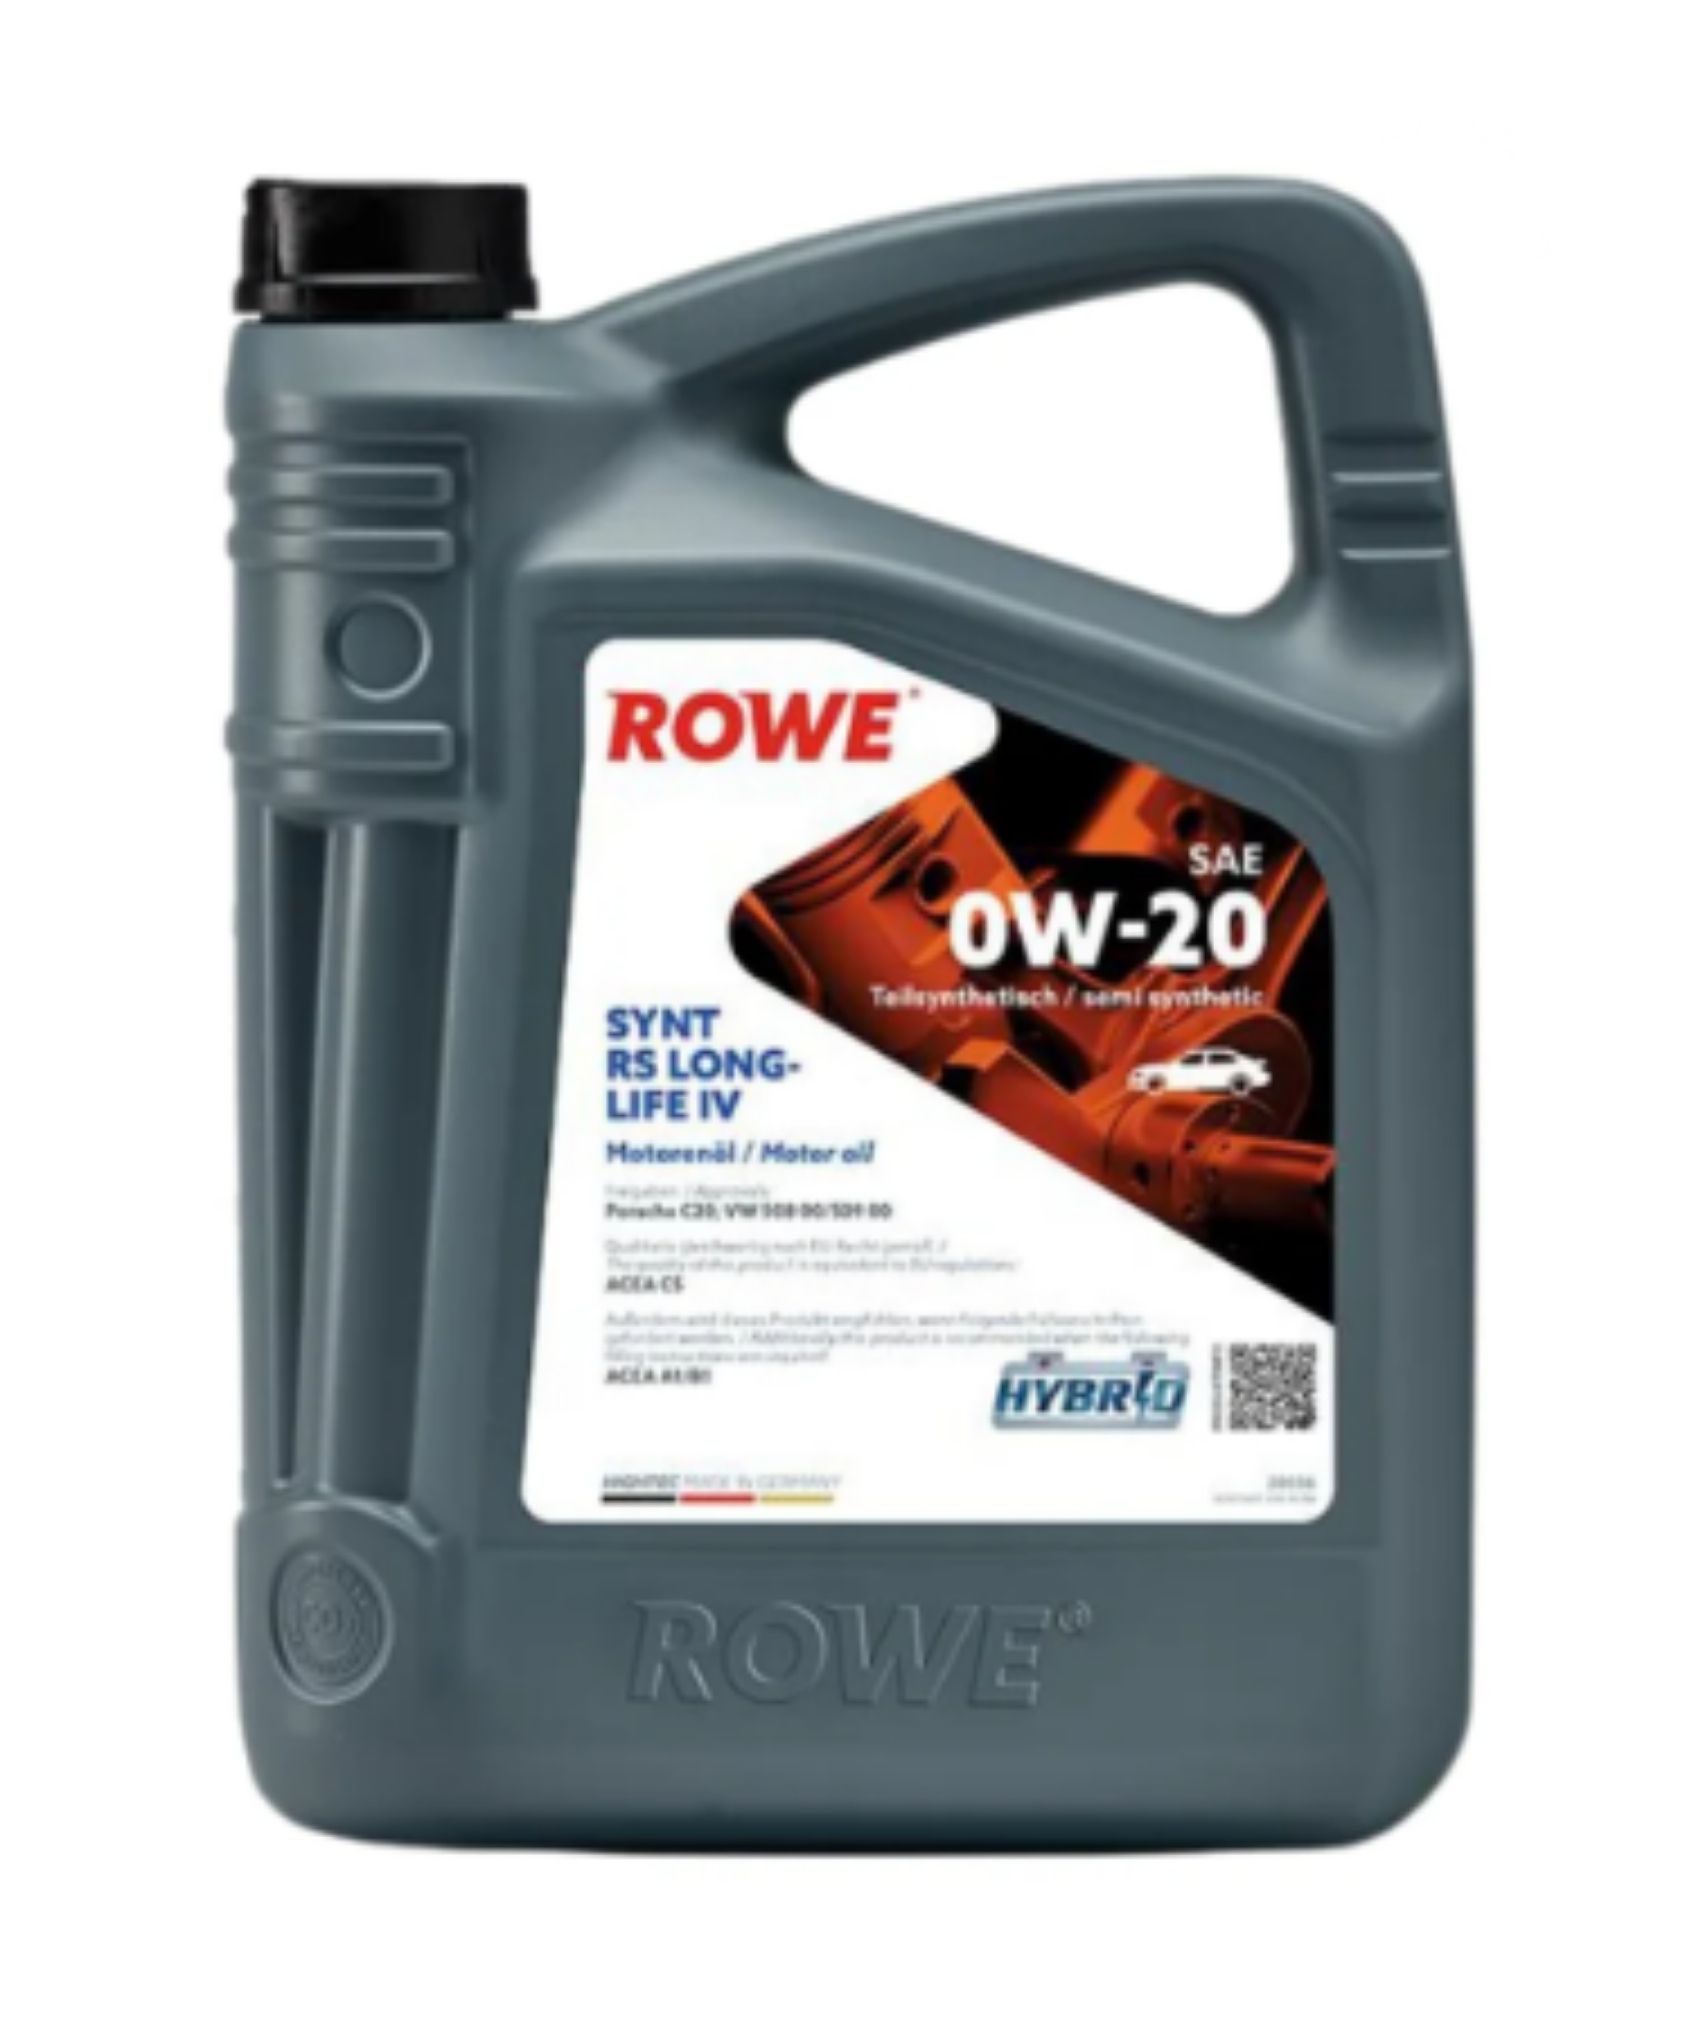 ROWE HIGHTEC SYNT RS LONGLIFE IV SAE 0W-20 5 Litre